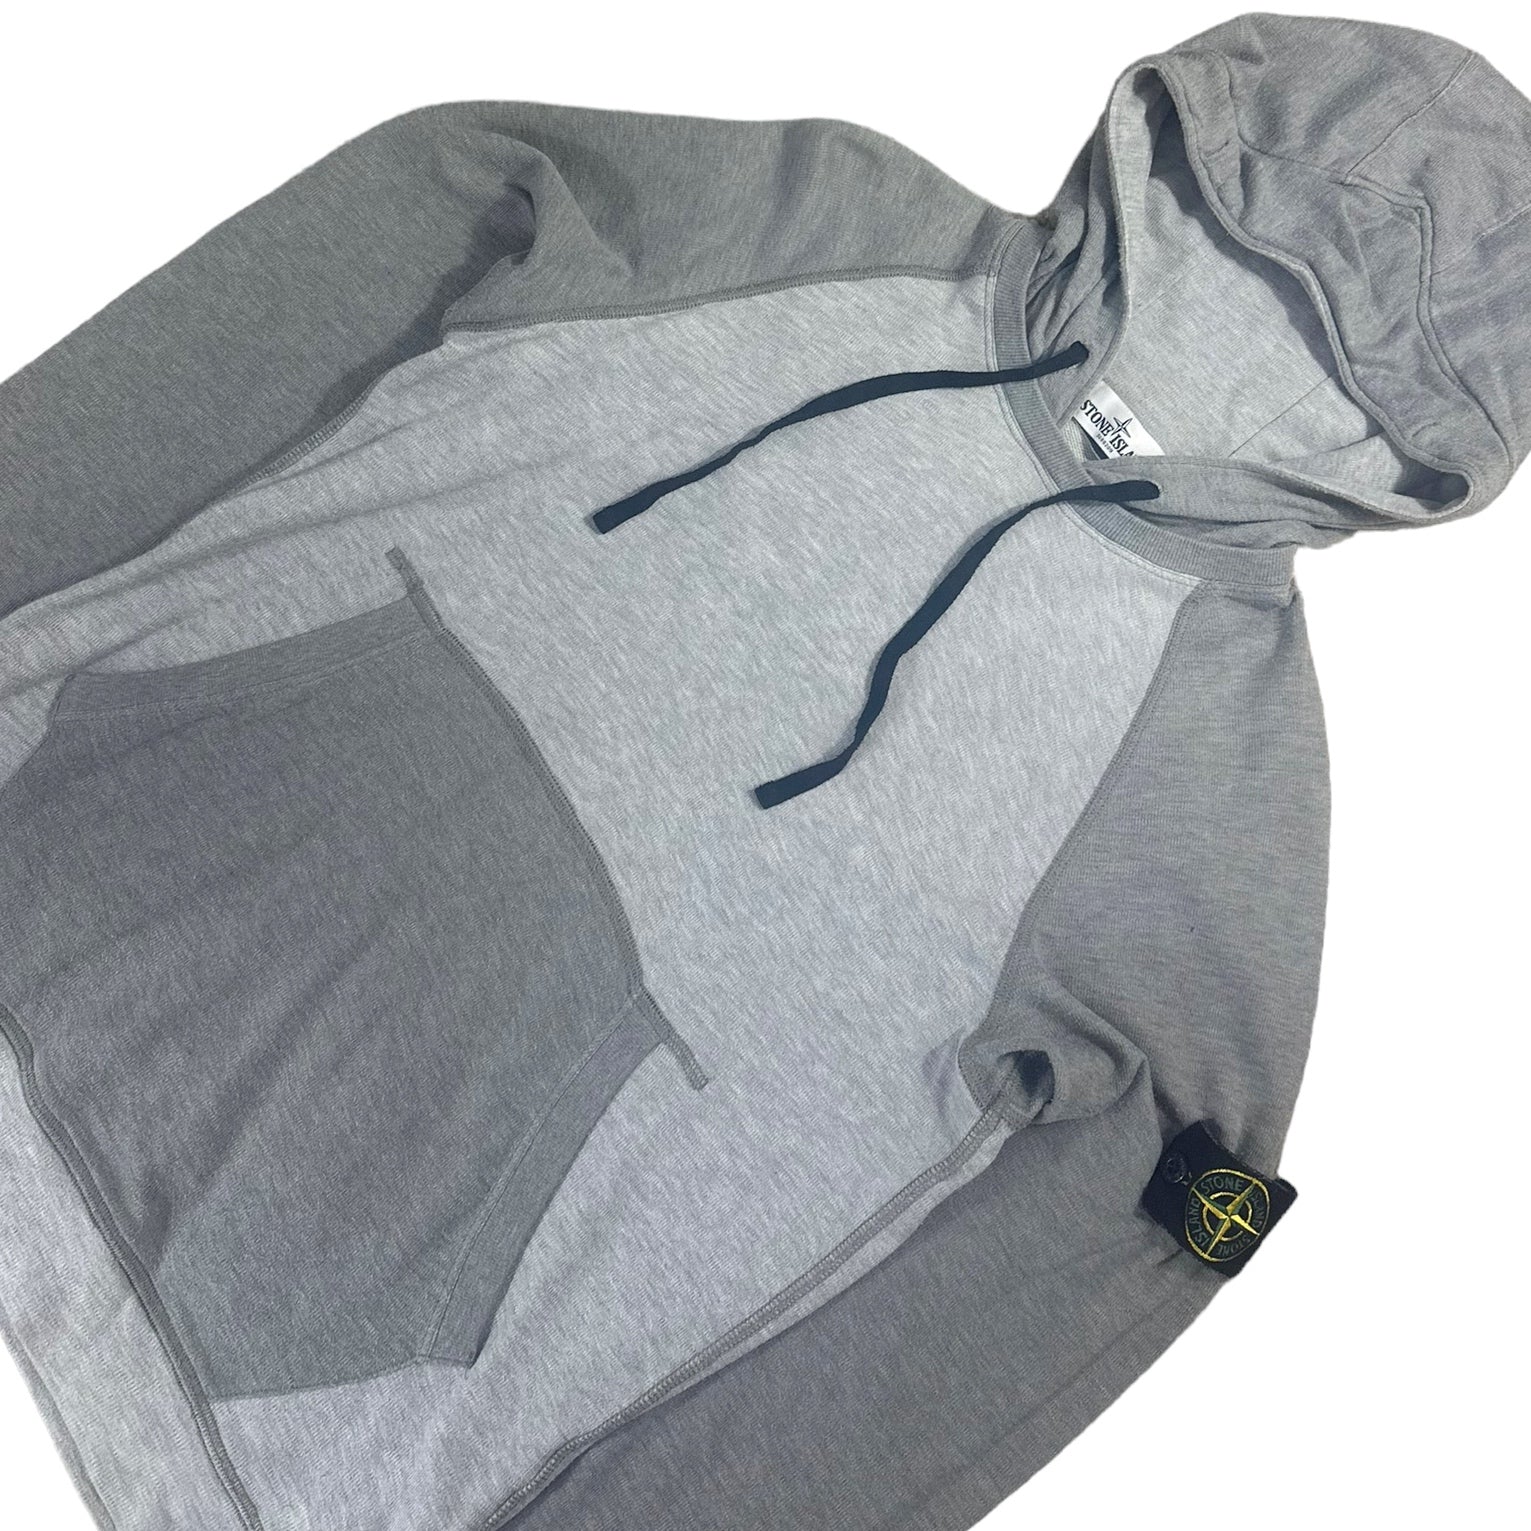 Stone Island Pullover Cotton Panel Hoodie with Drawstrings